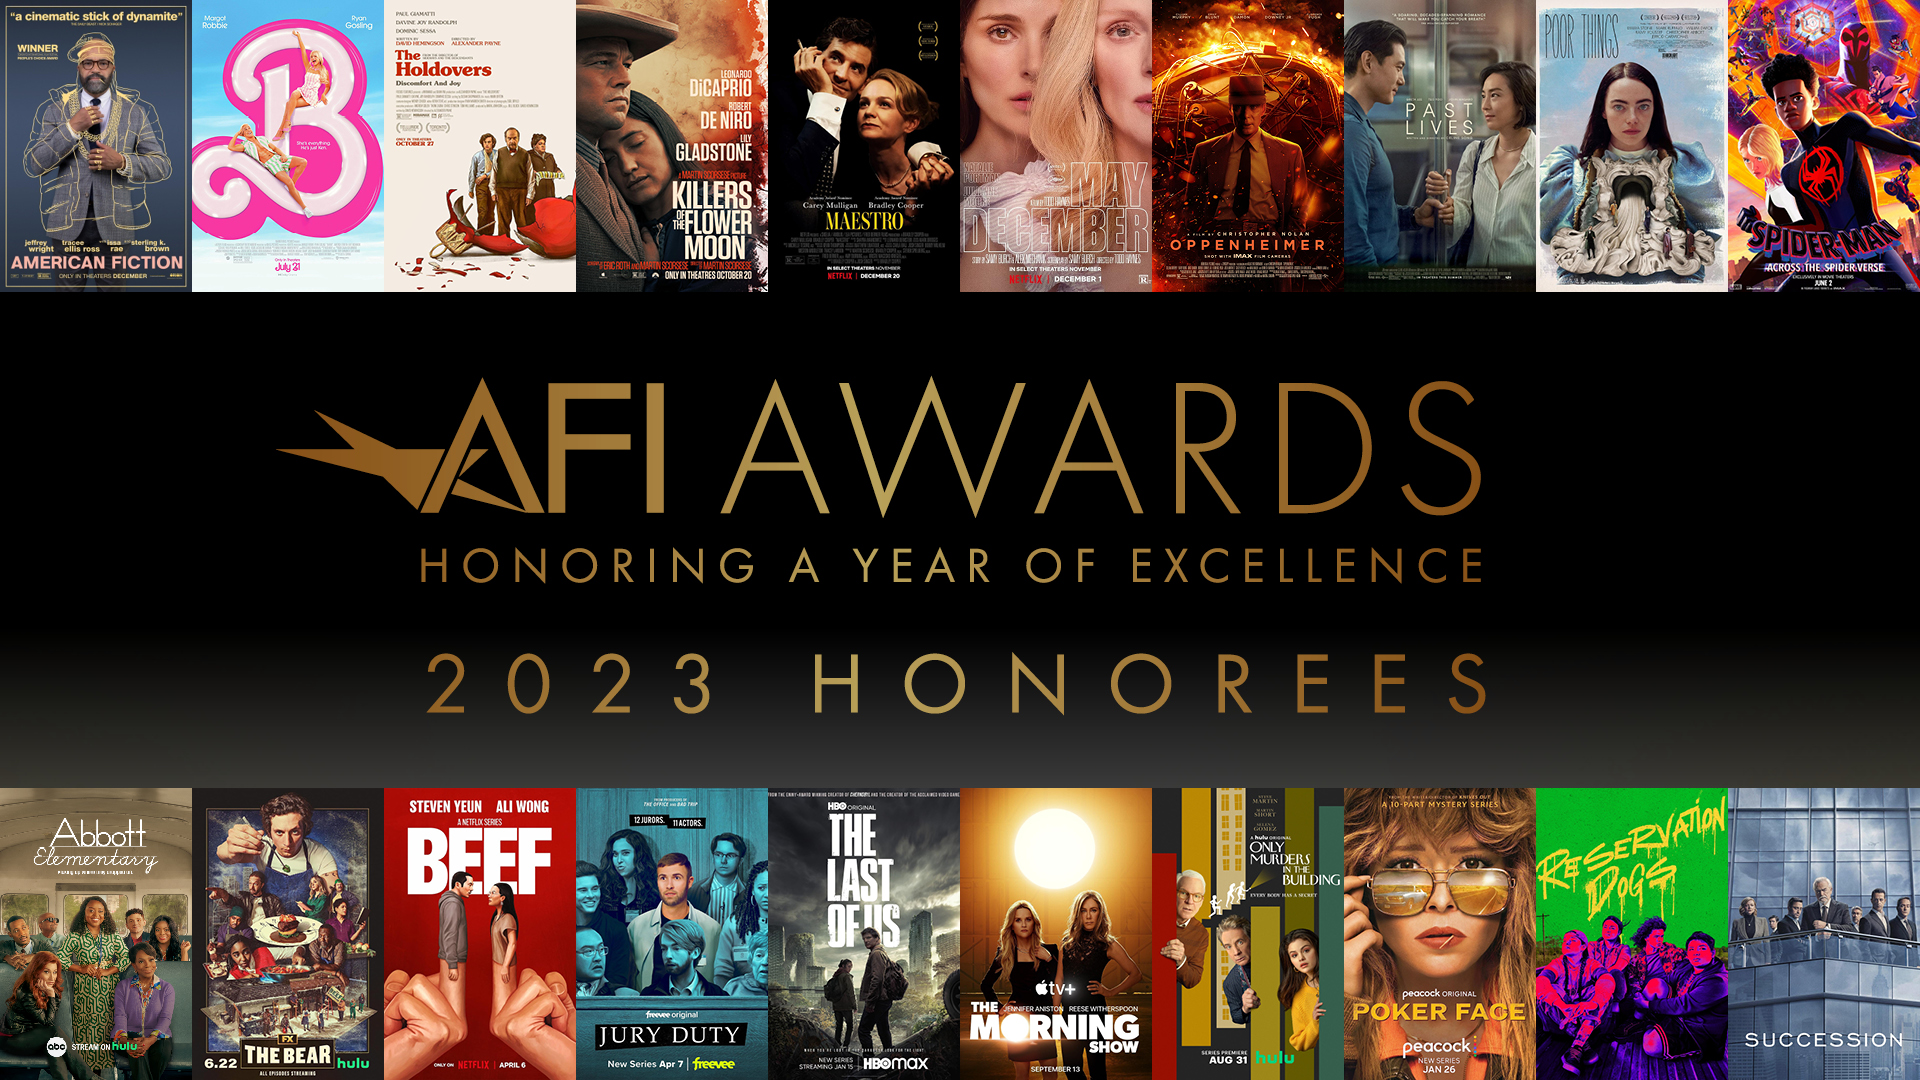 AFI Movie Club: AFI AWARDS Honoree THE QUEEN'S GAMBIT